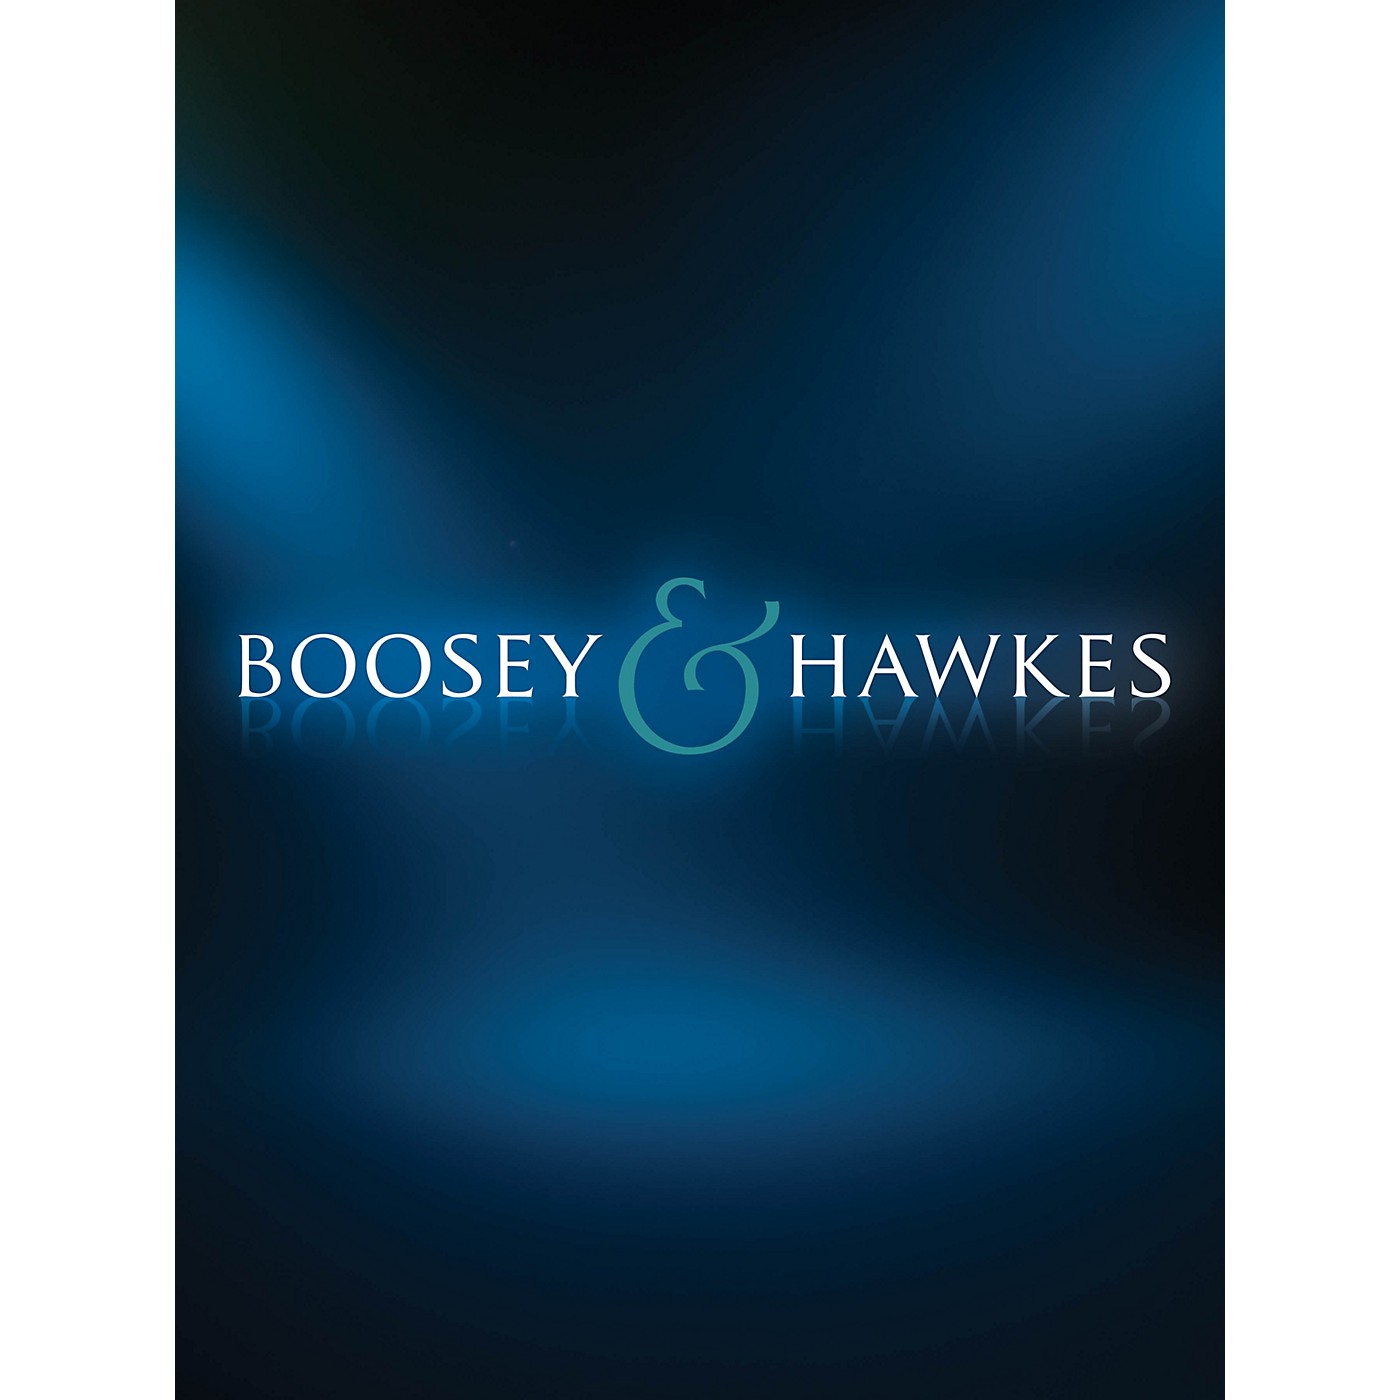 SIMROCK Conc for Oboe and String Orchestra Boosey & Hawkes Chamber Music Series Book thumbnail